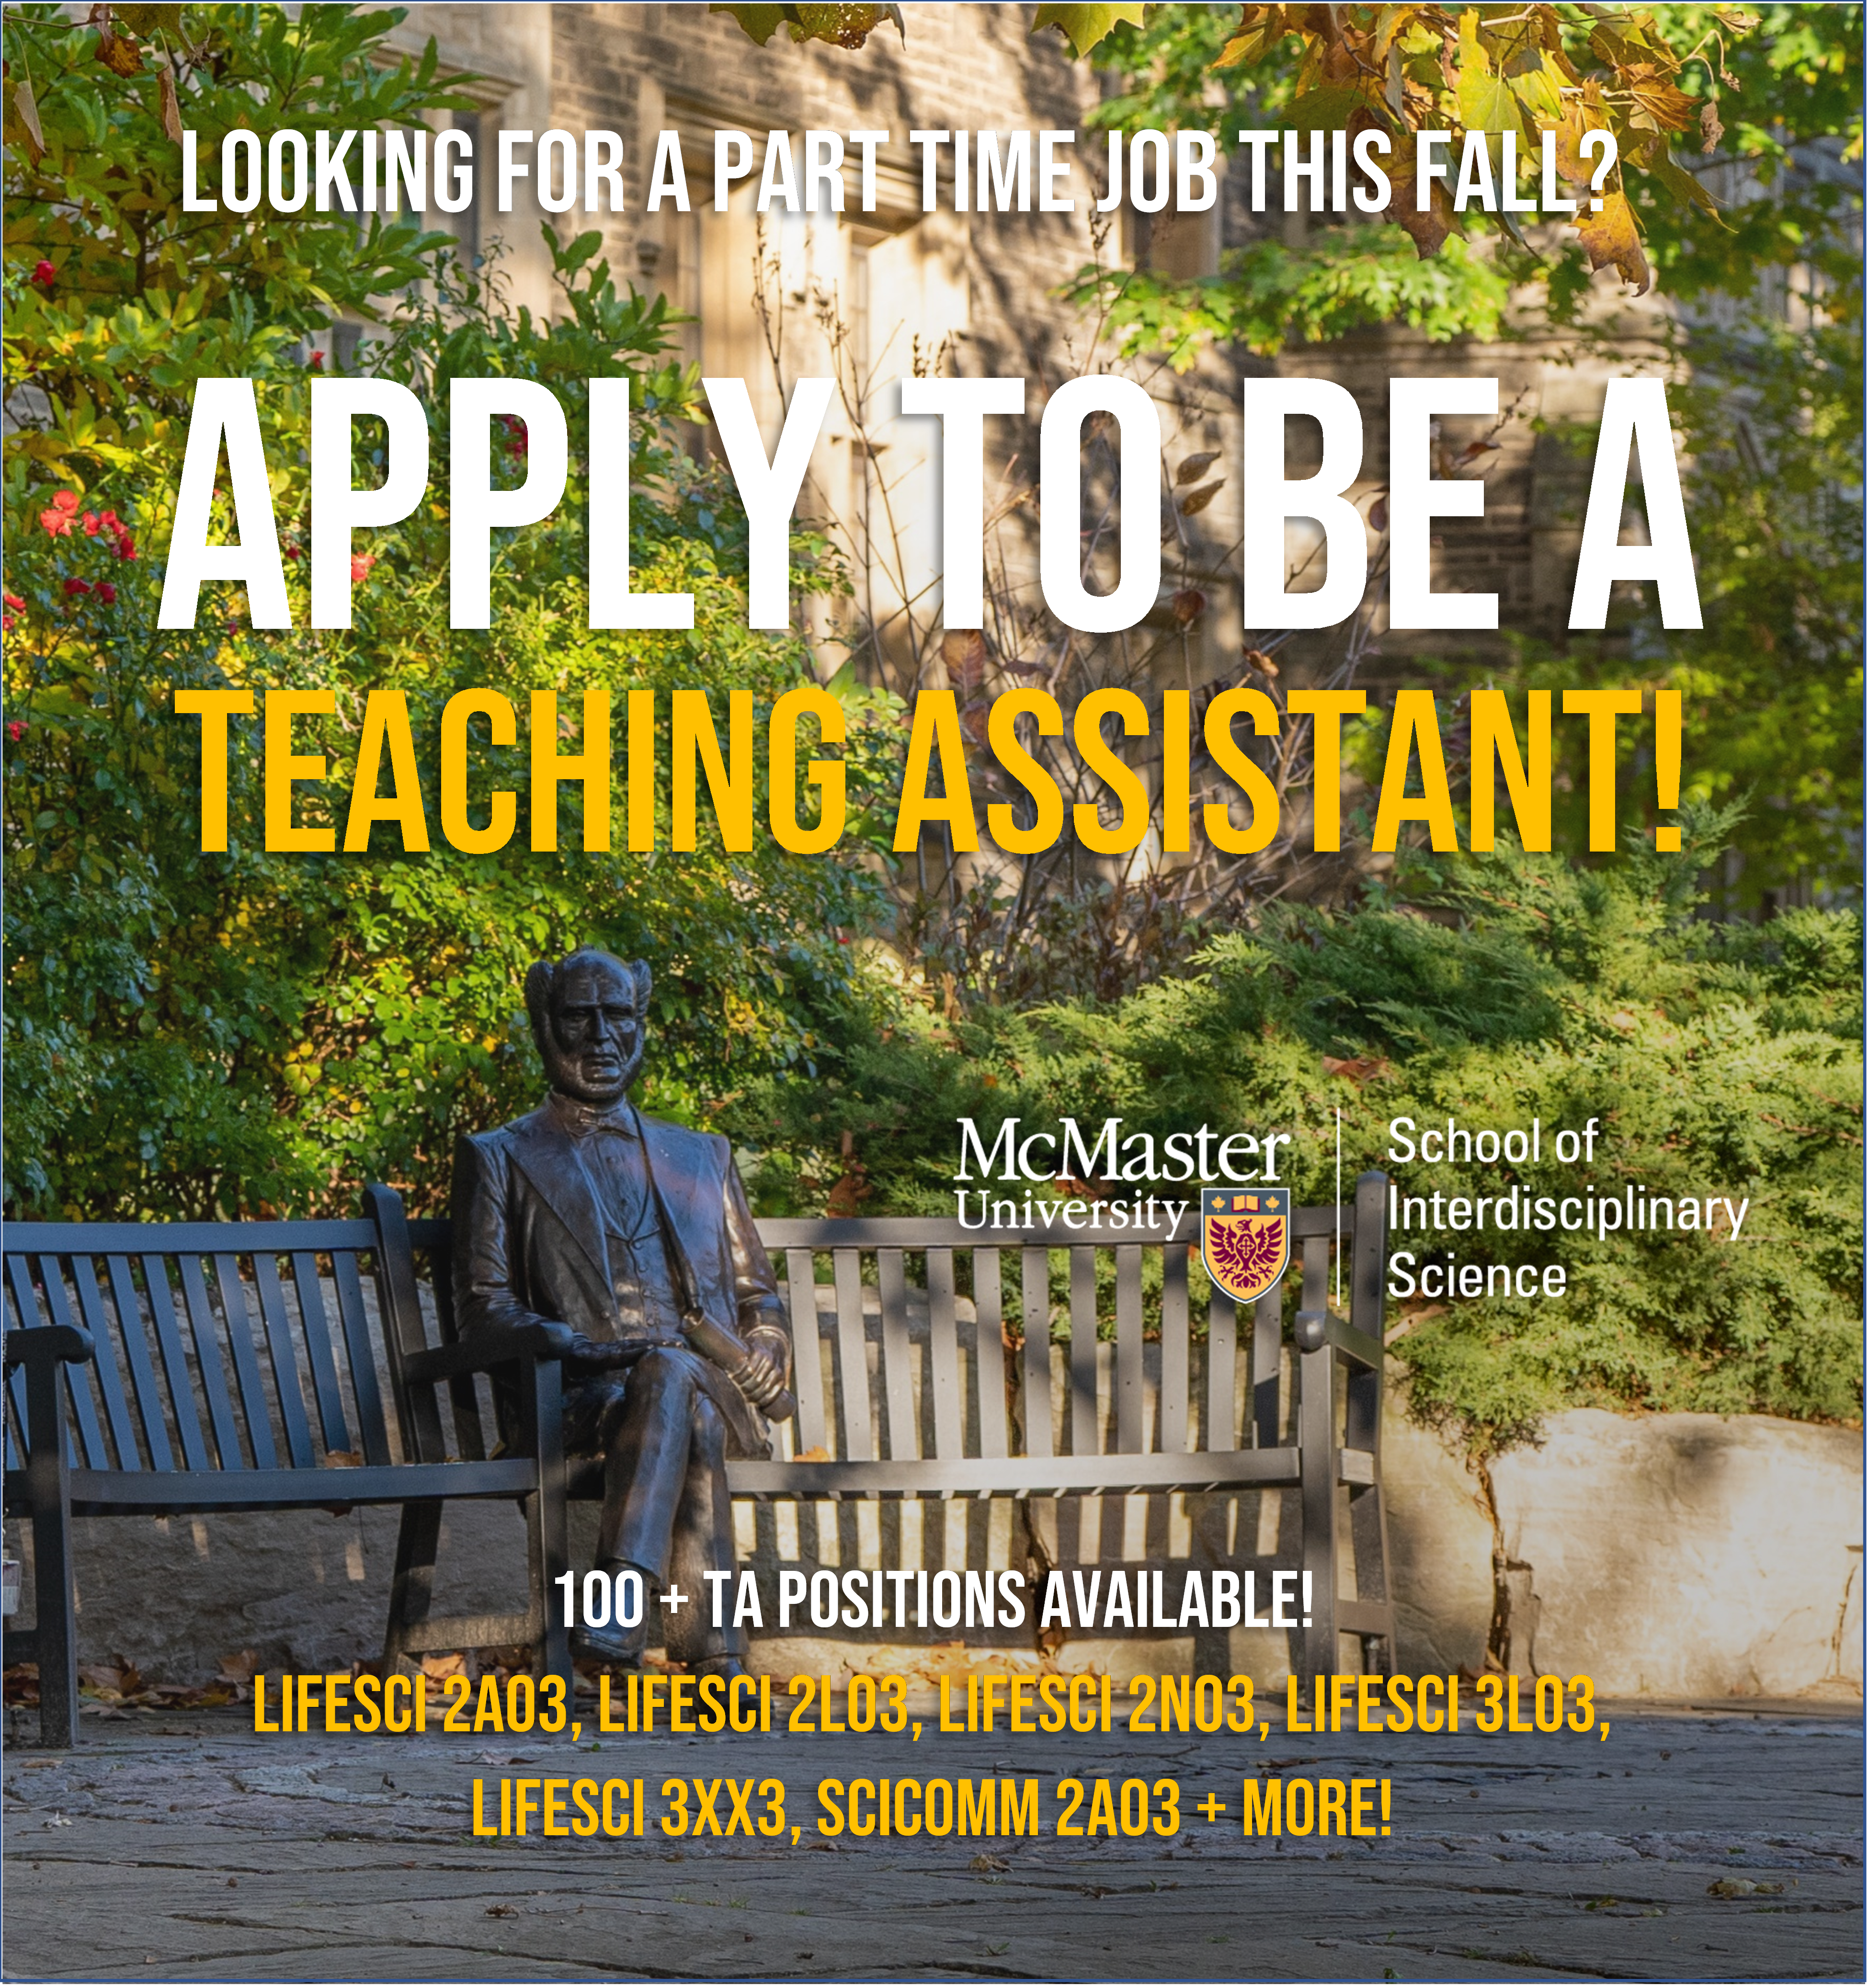 McMaster pdf advertisement for TA hires